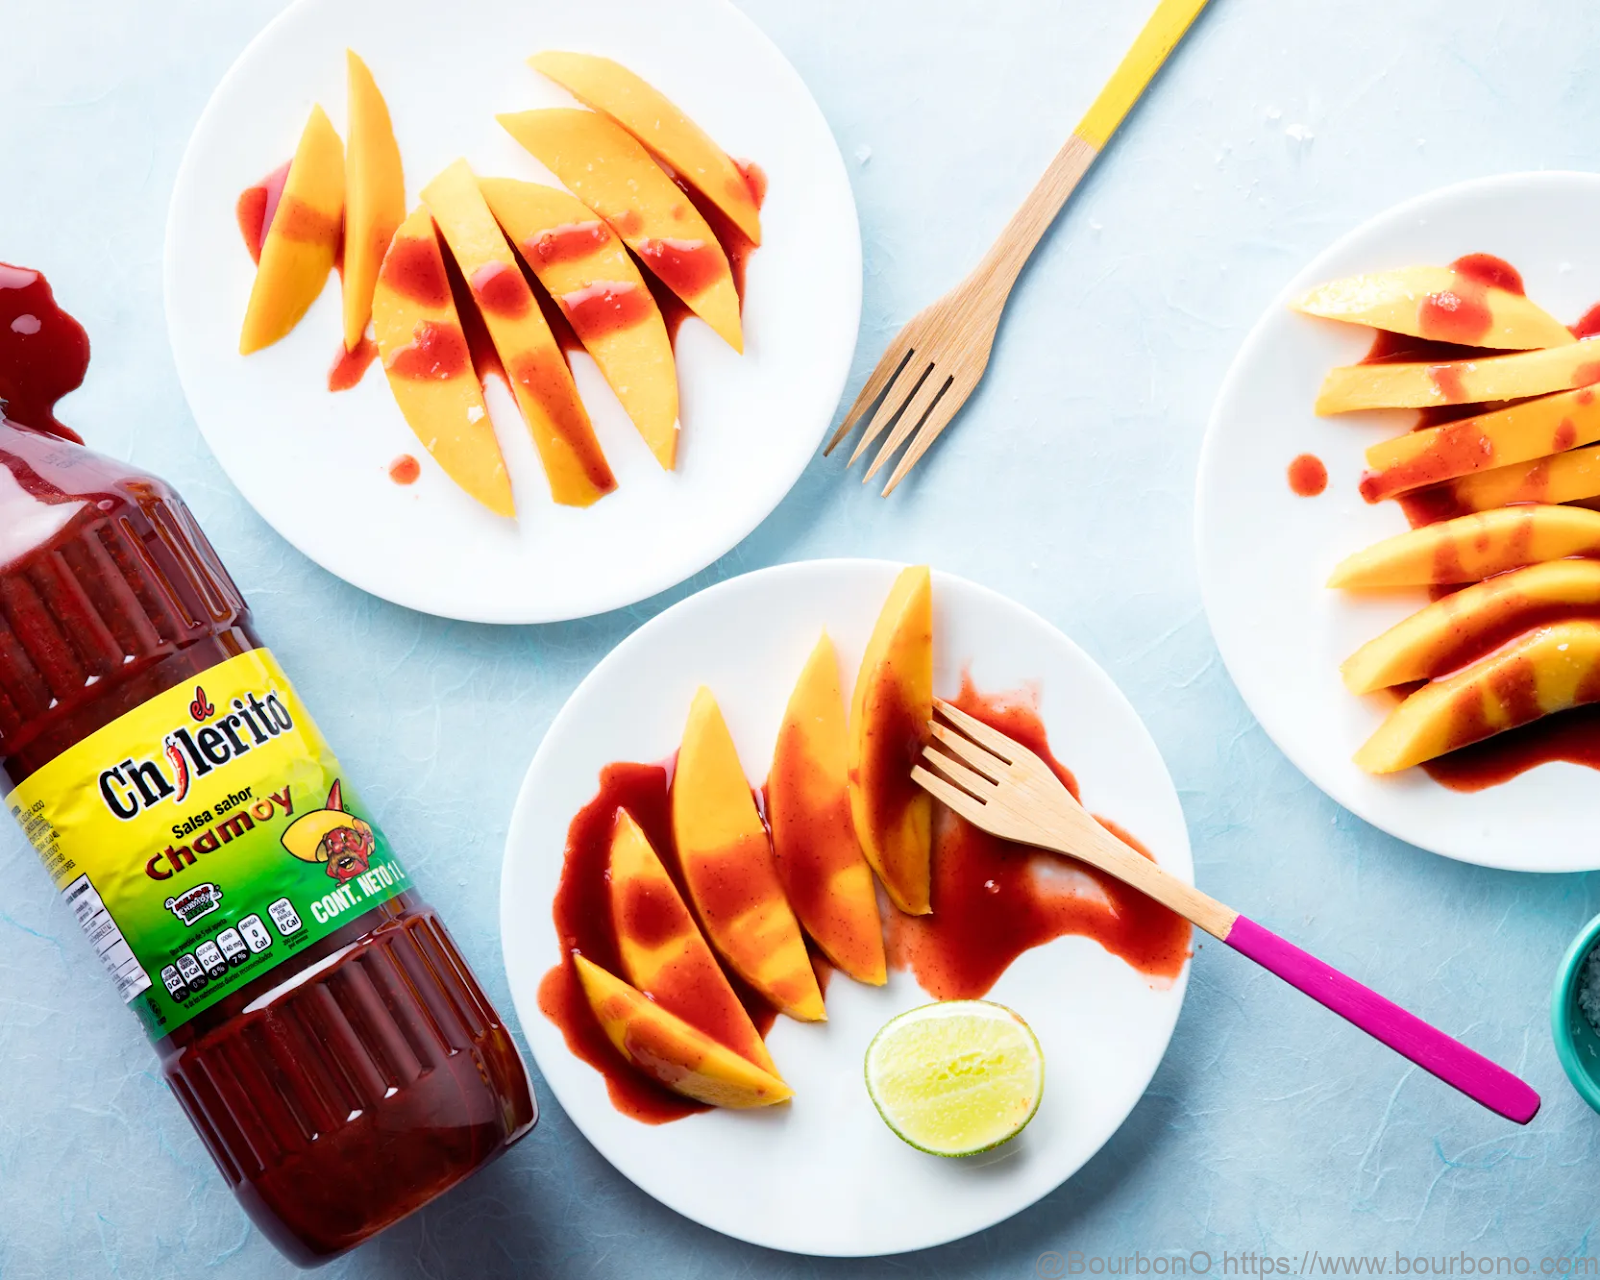 Chamoy is a favorite spice of Mexicans.